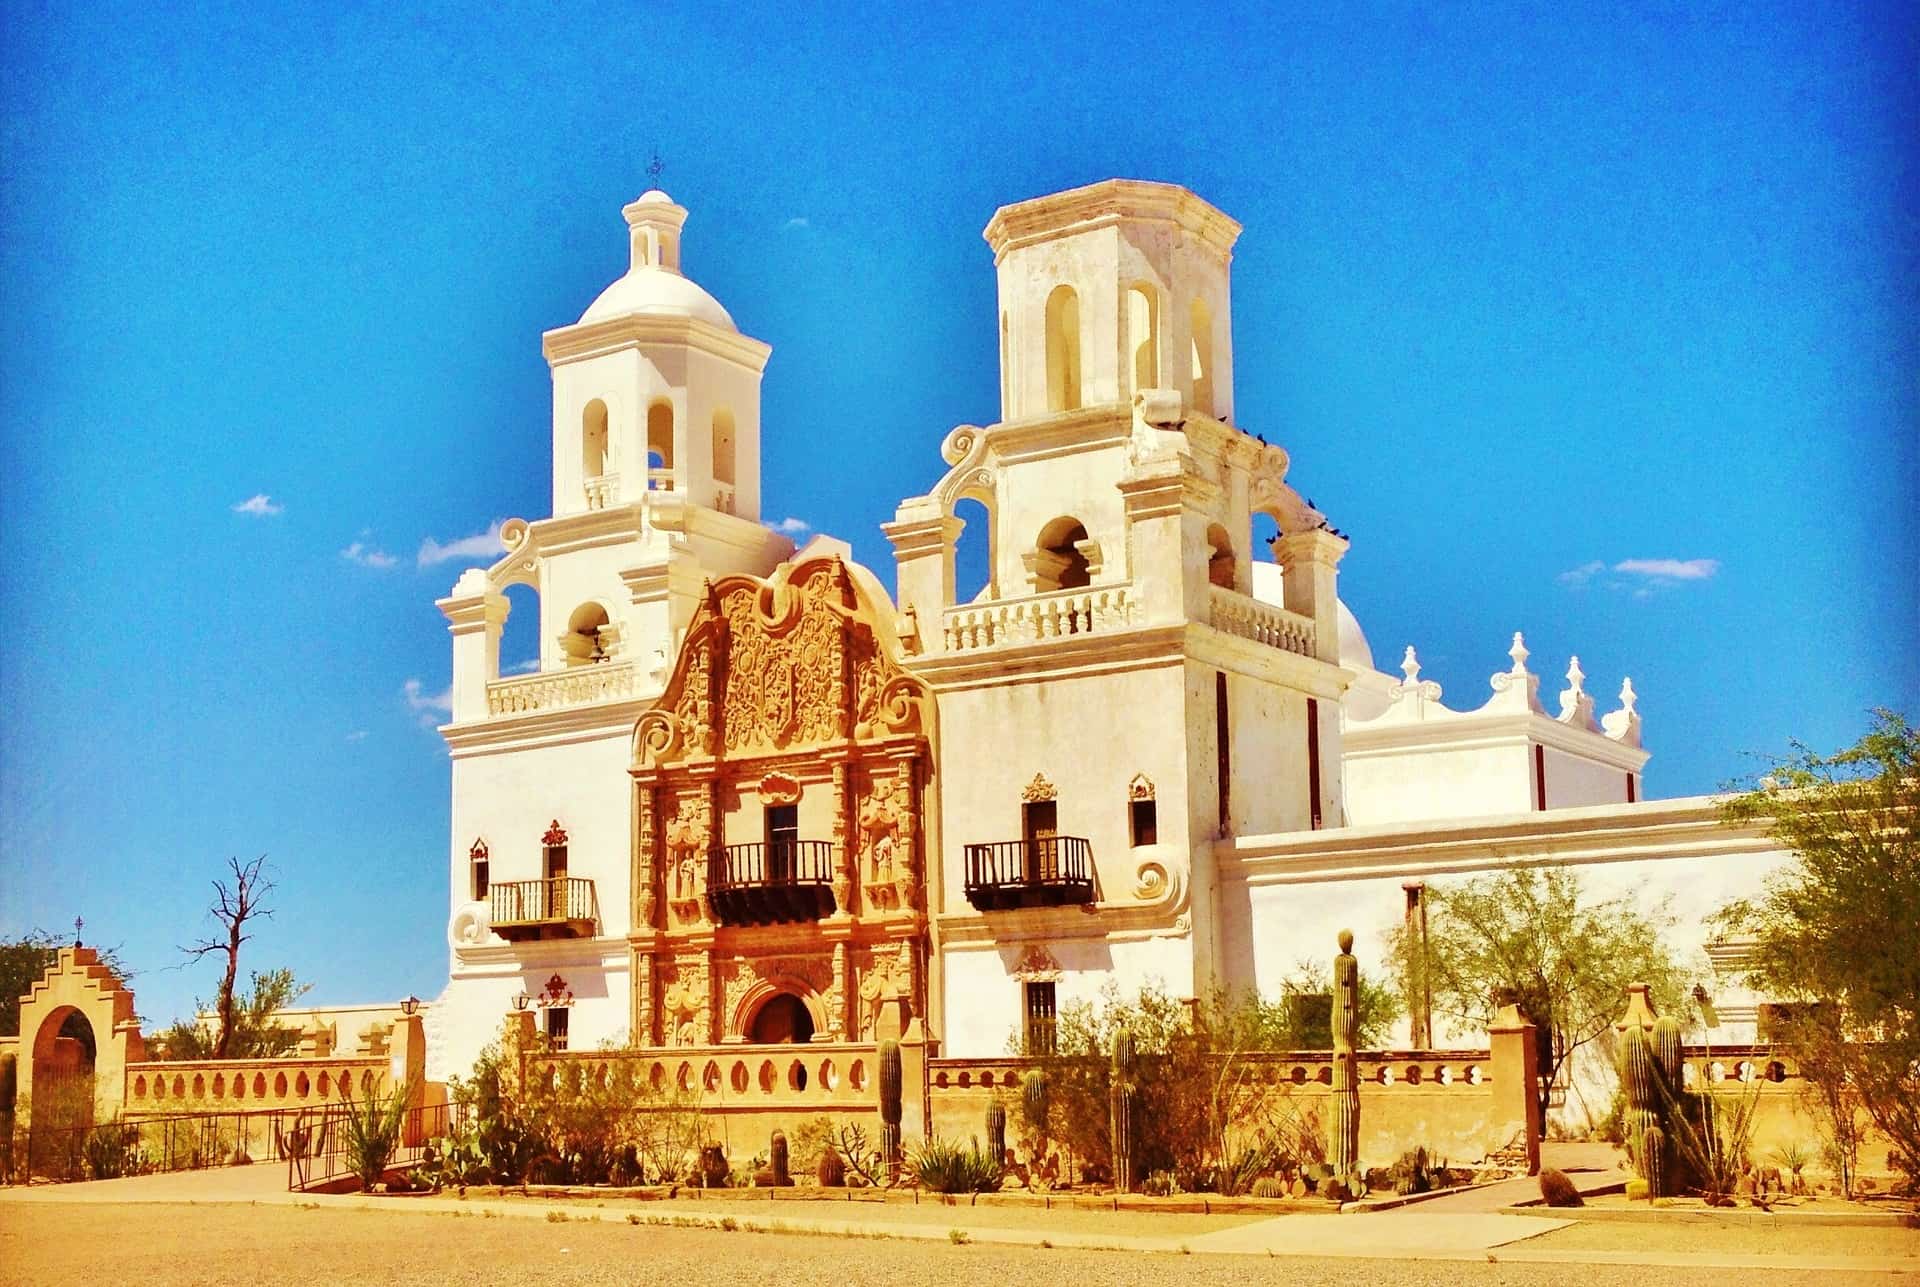 Best things to do in Tucson Arizona - Matt Miner - San Xavier del Bac Mission by Michelle_Raponi on Pixabay 278452